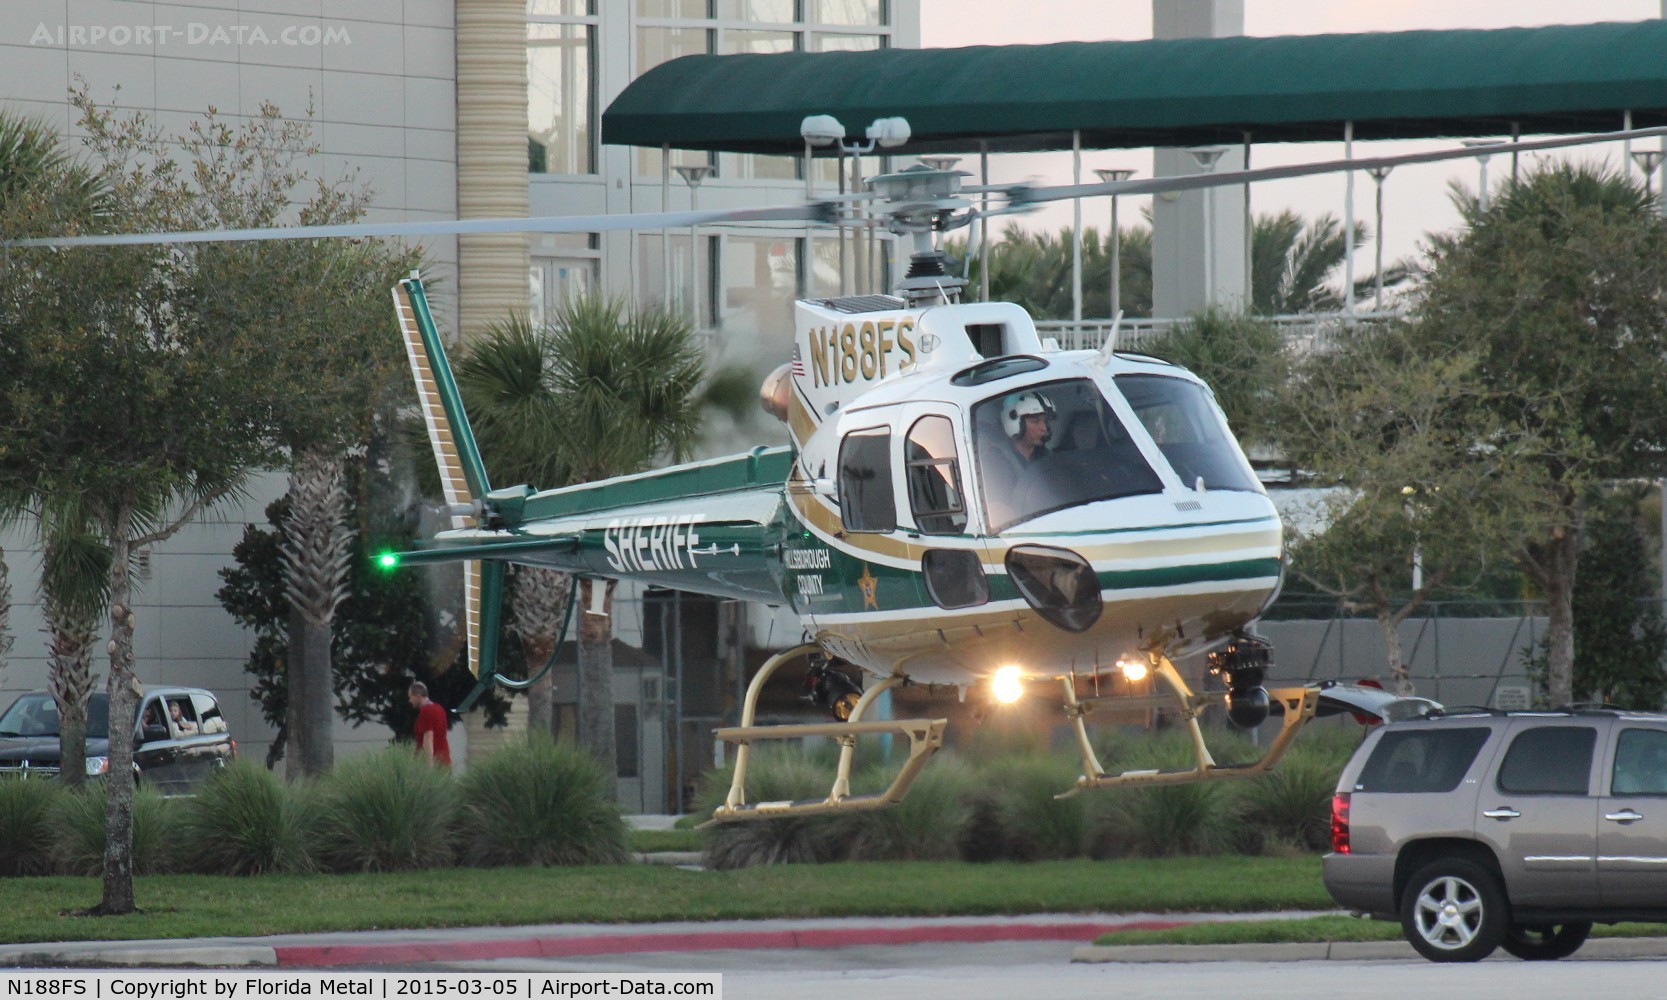 N188FS, 2014 Airbus Helicopters AS-350B-2 Ecureuil C/N 7863, Hillsborough County Sheriff at Heliexpo Orlando